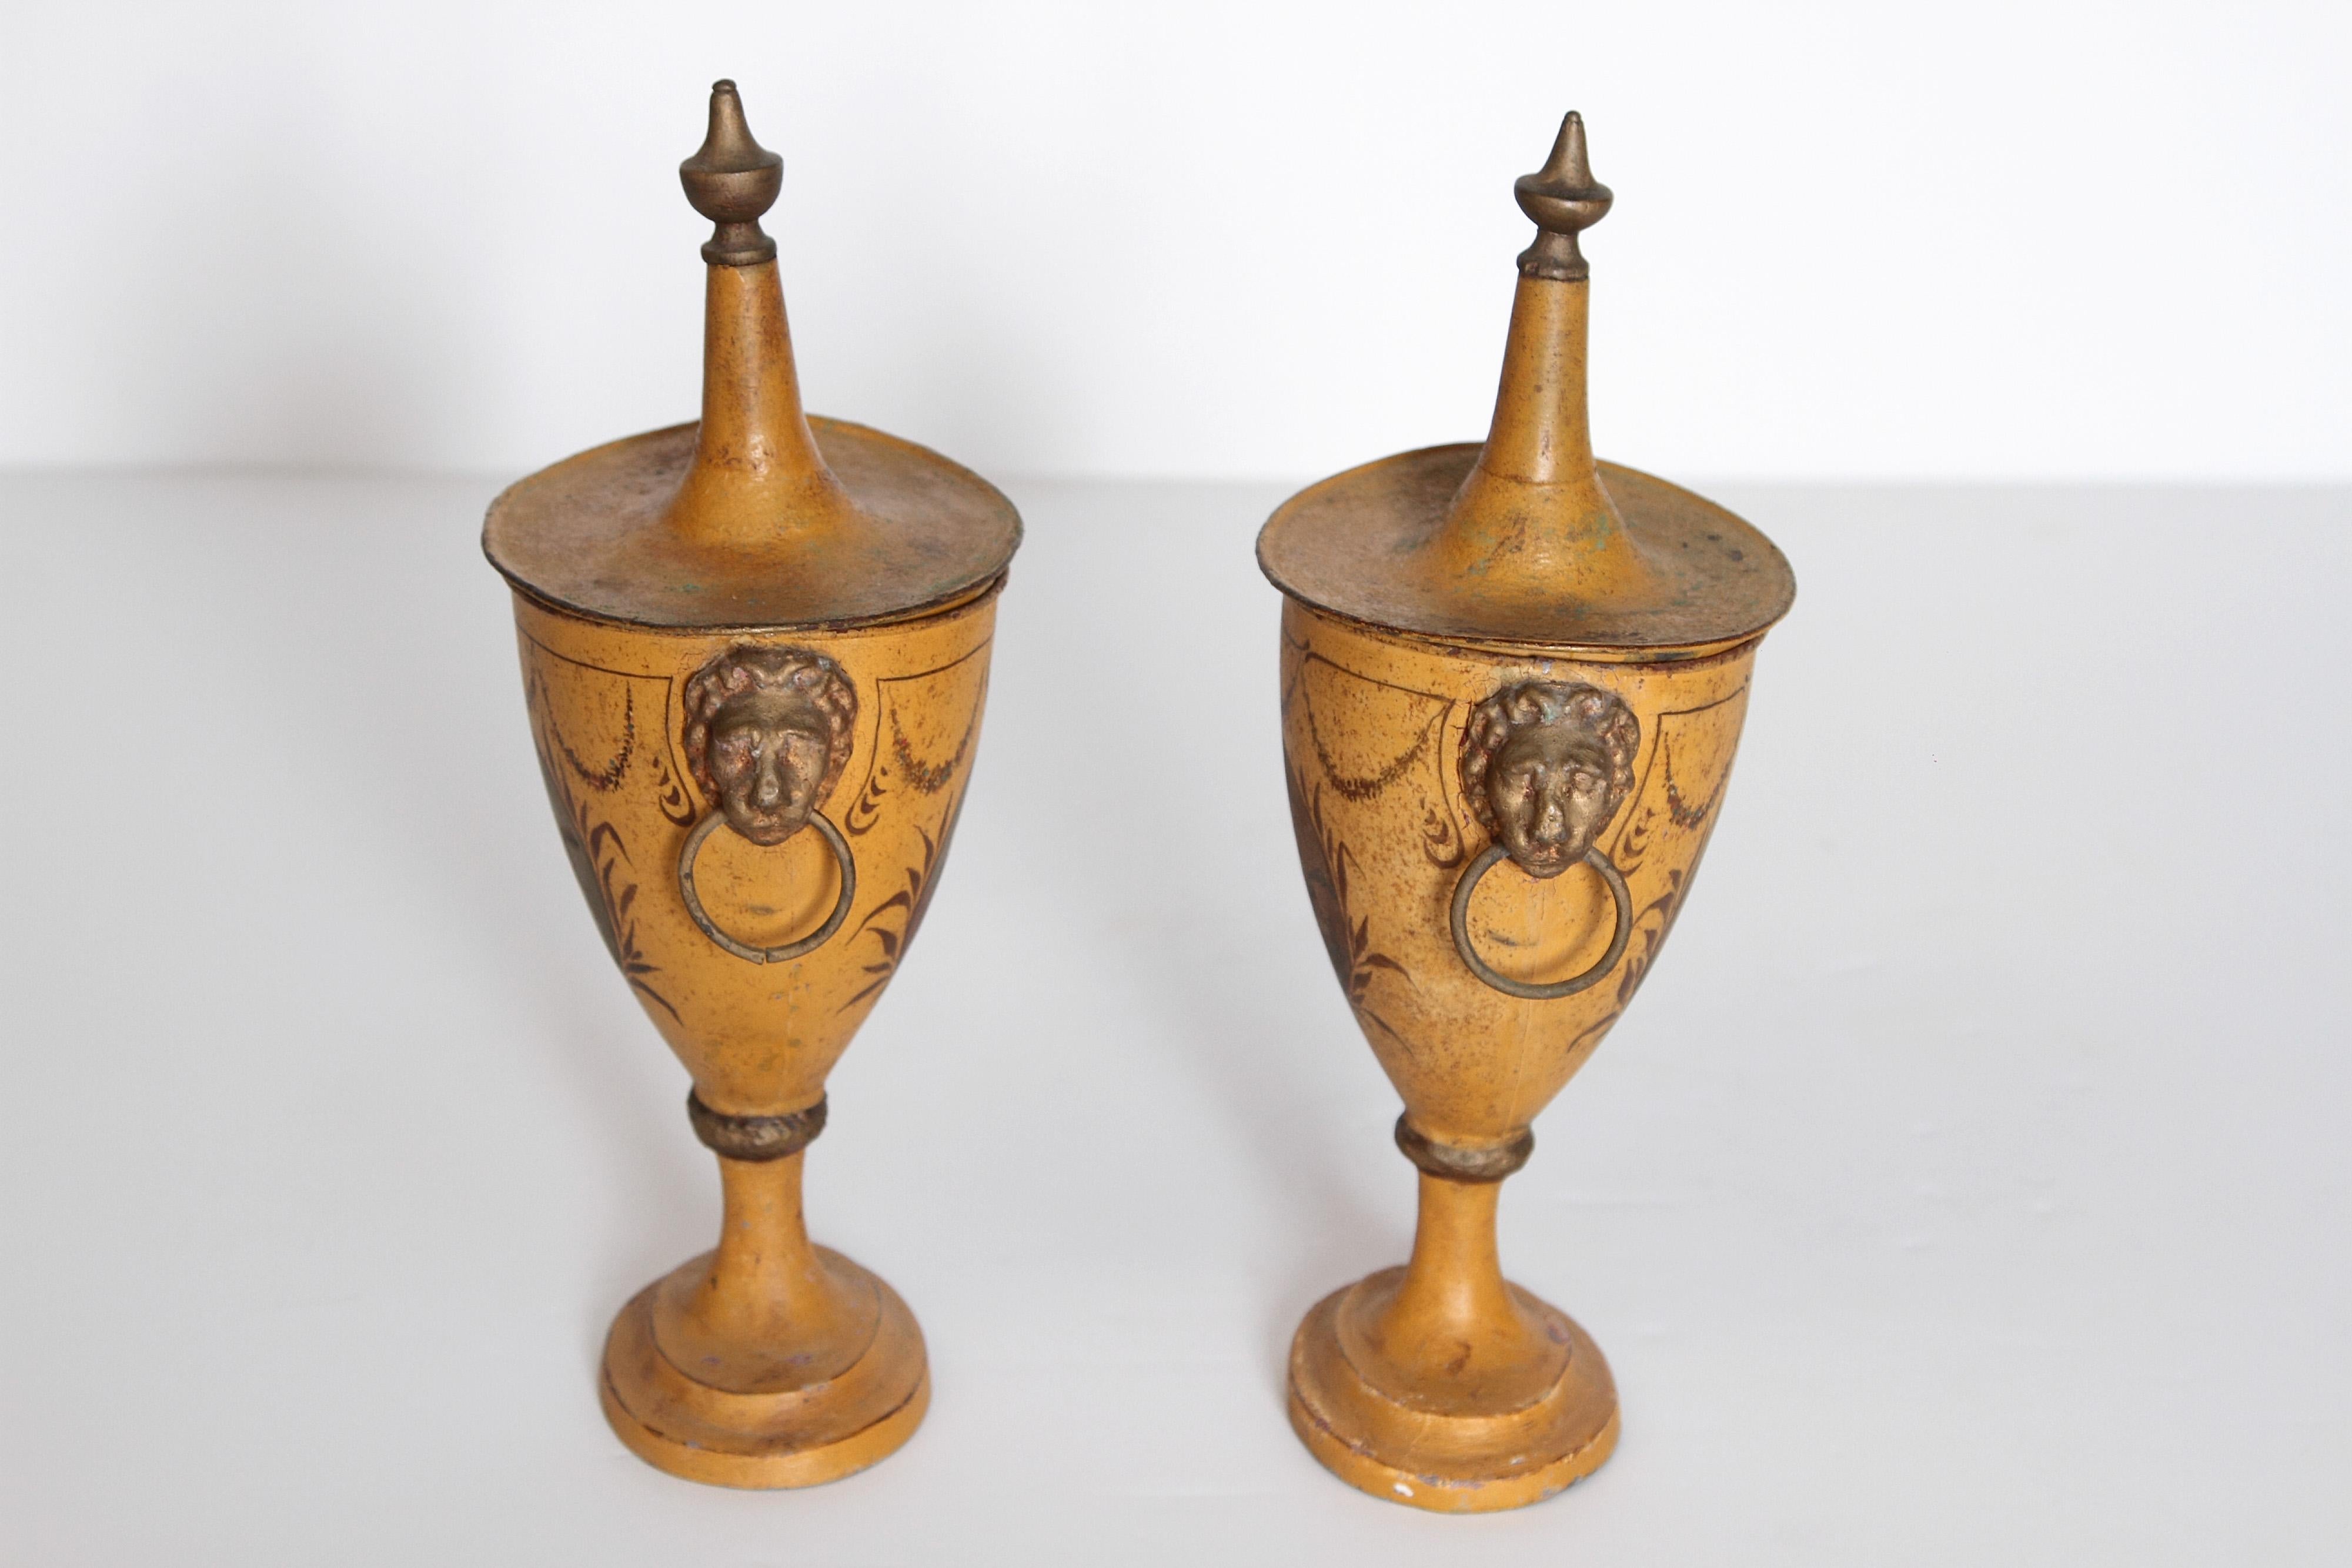 Pair of English Regency Tole Painted Chestnut Urns (Englisch)